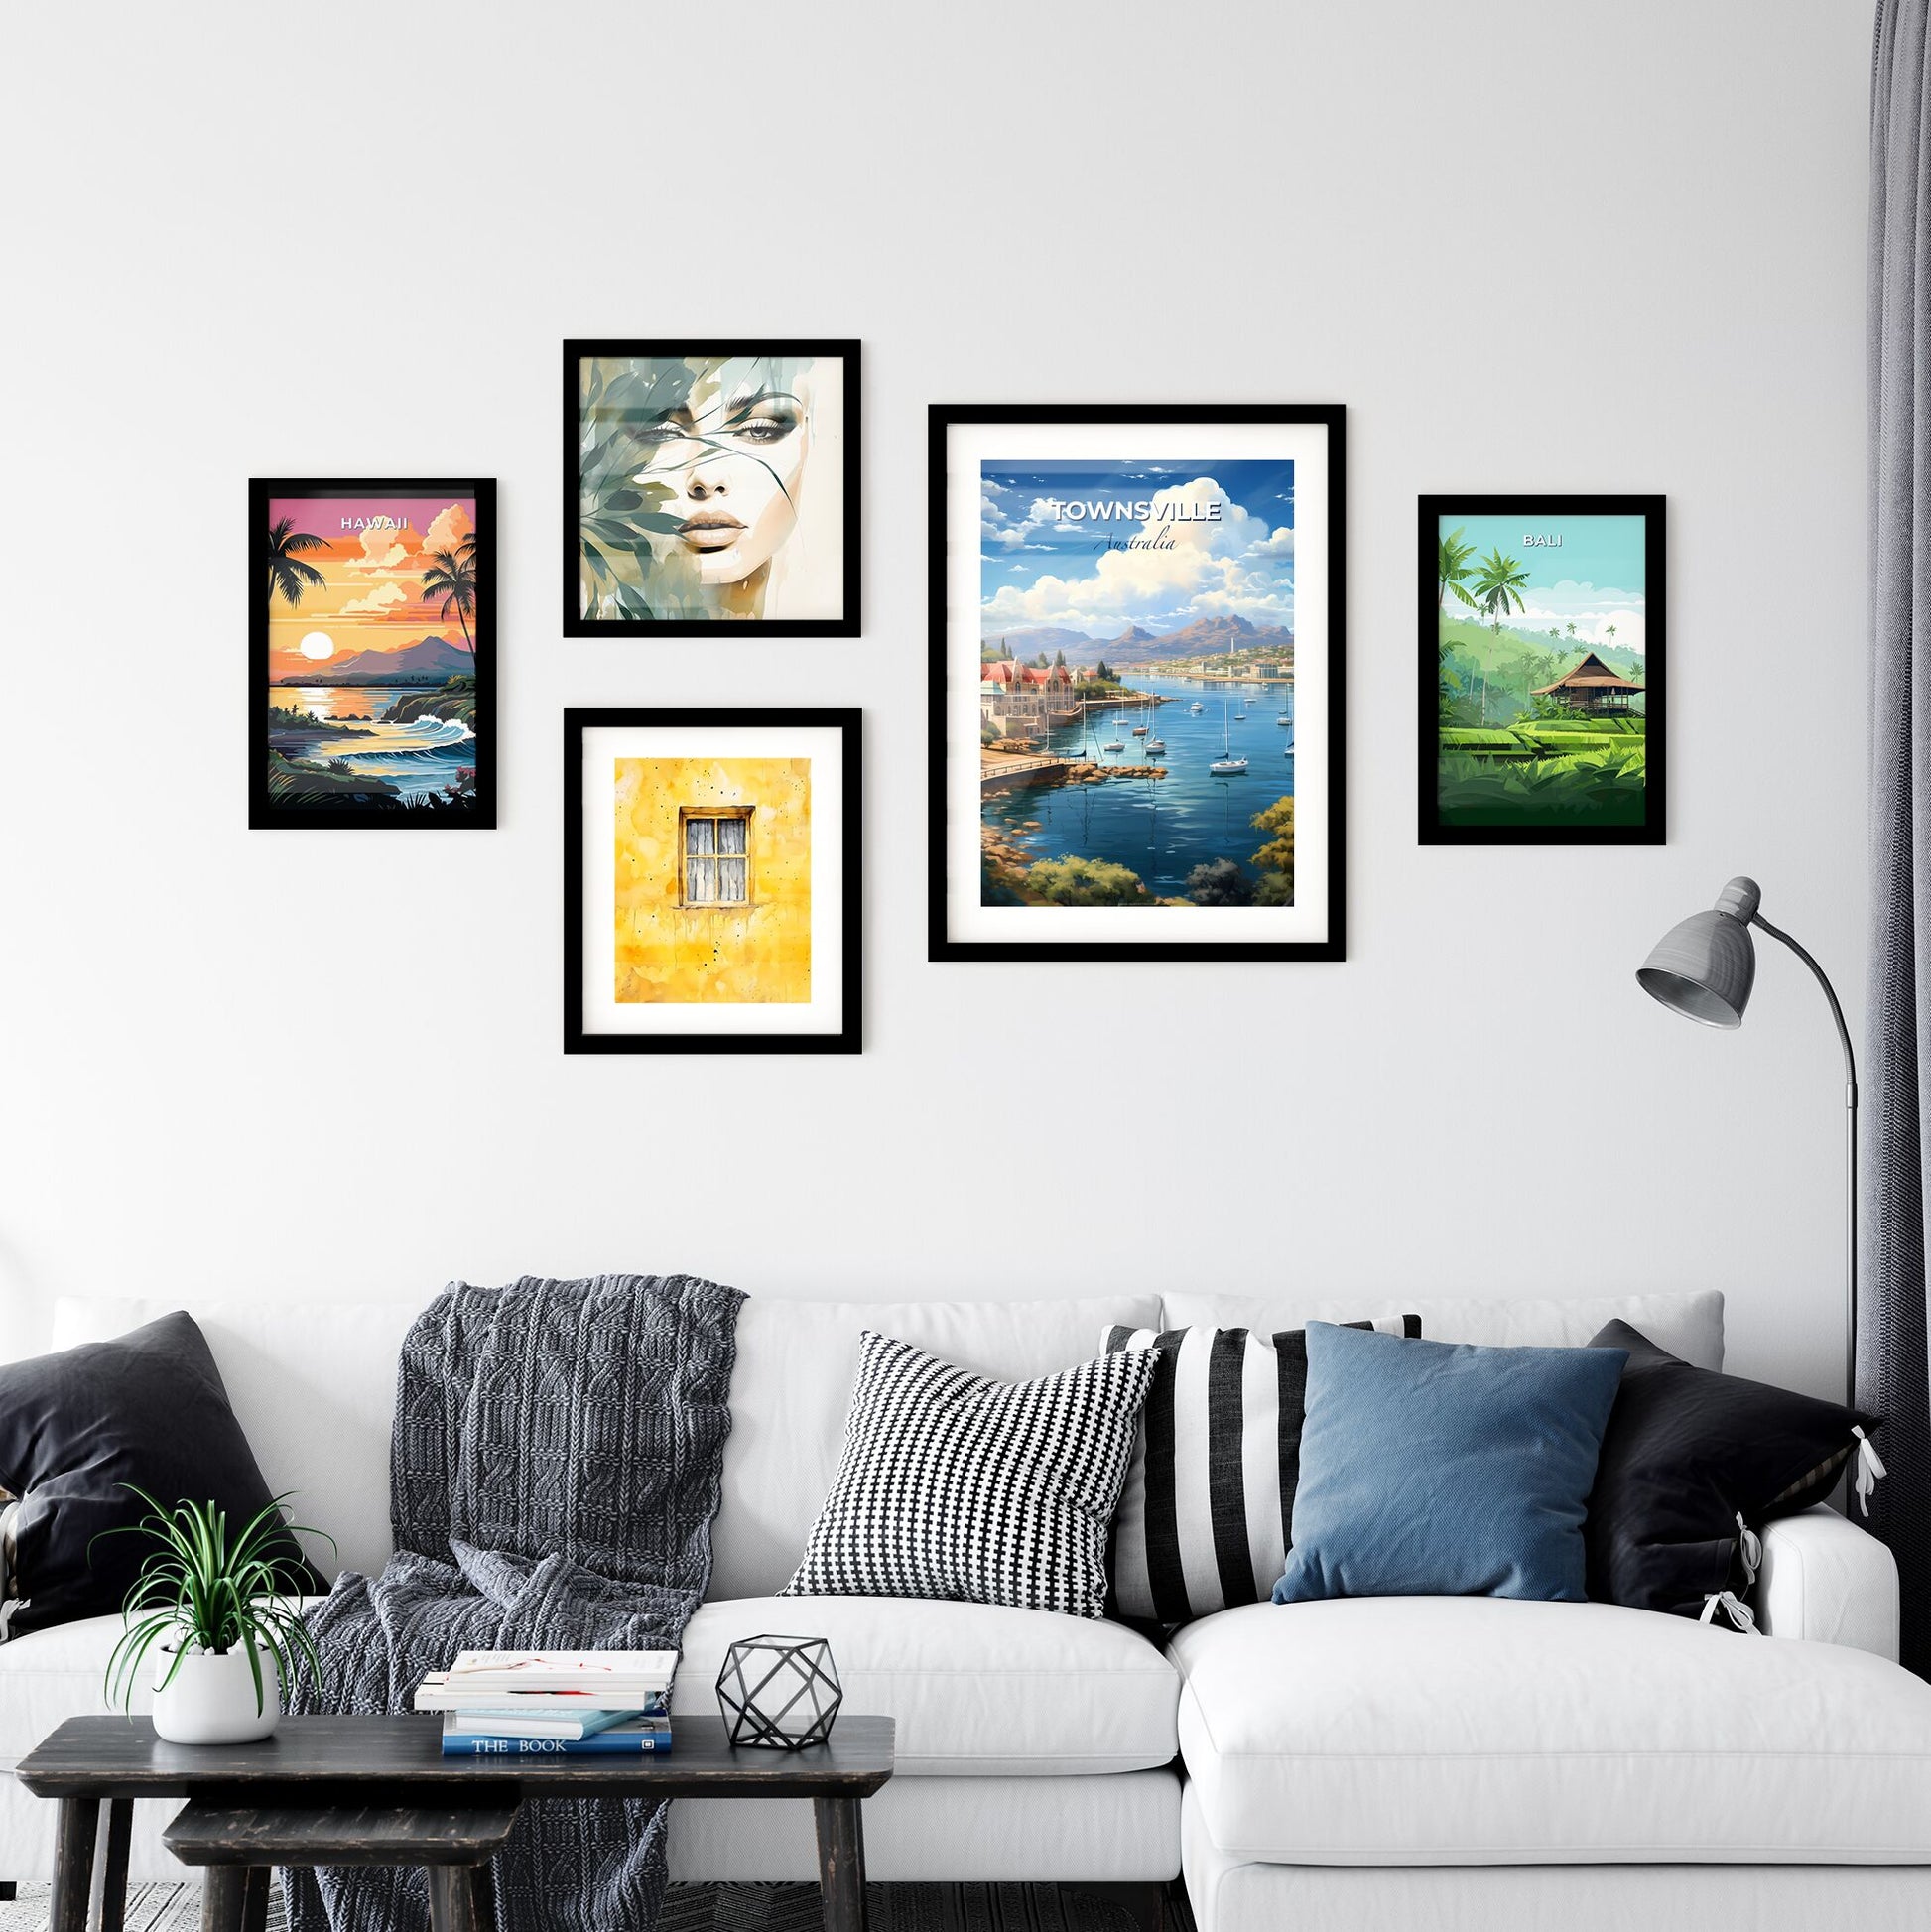 Artful Townsville Skyline: Vibrant Painting with Waterfront and Cityscape Depiction Default Title